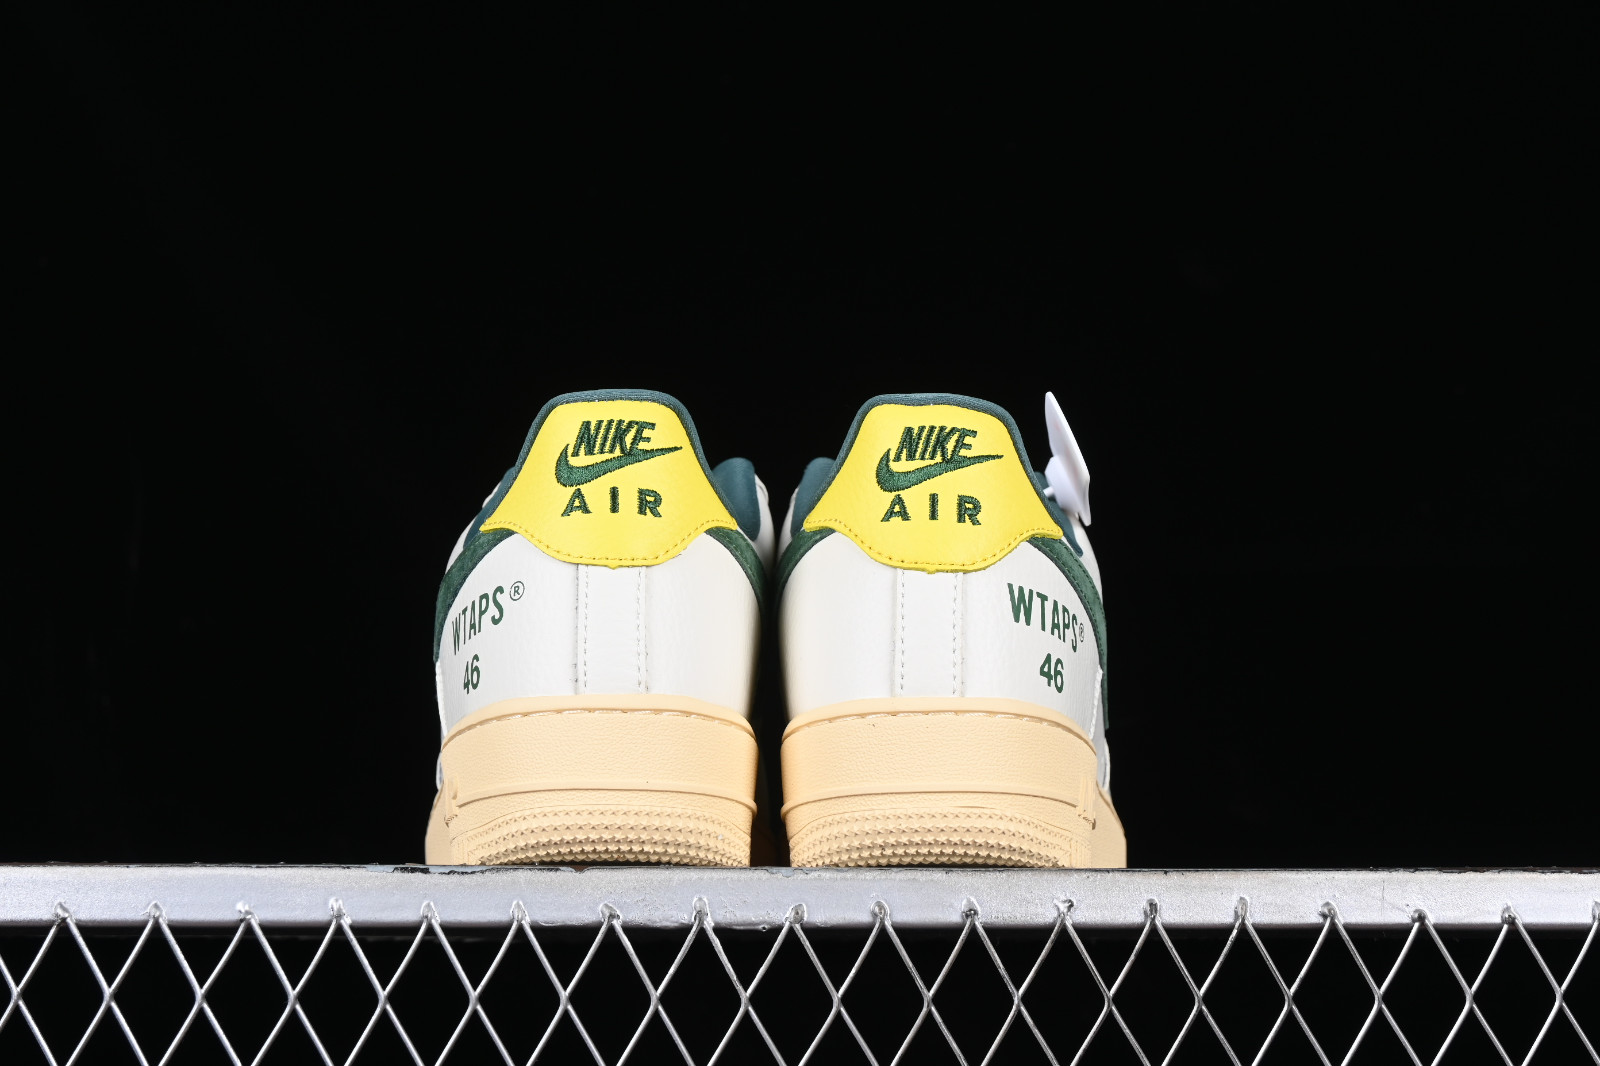 Air force 1 low trainers Nike x Off-White Yellow size 42.5 EU in